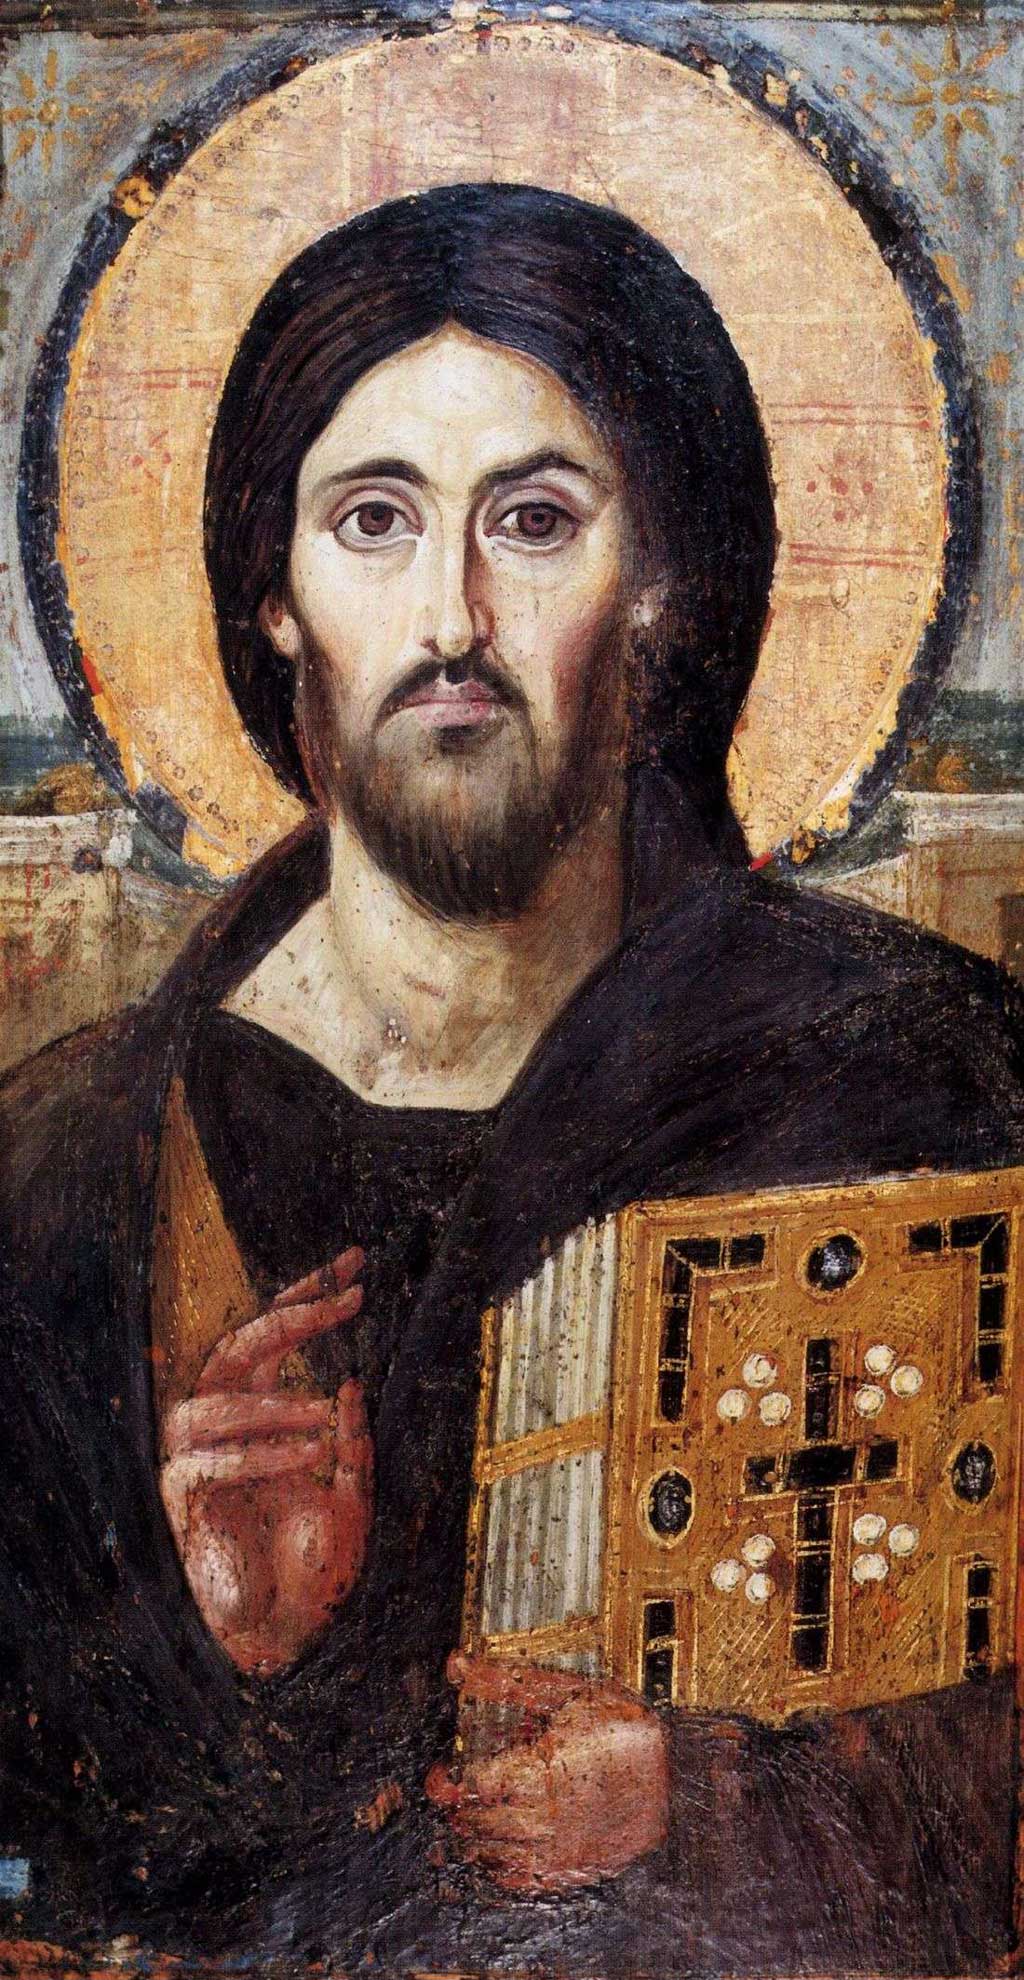 The oldest known icon depicting Jesus Christ (6th century) in Saint Catherine's Monastery, Egypt. In this image, Jesus grasps a New Testament in his left arm while making a symbol for peace with two right fingers. Also notable here is that Jesus eyes are of different color, with his brown iris dominating far more of his left eye than his right eye.